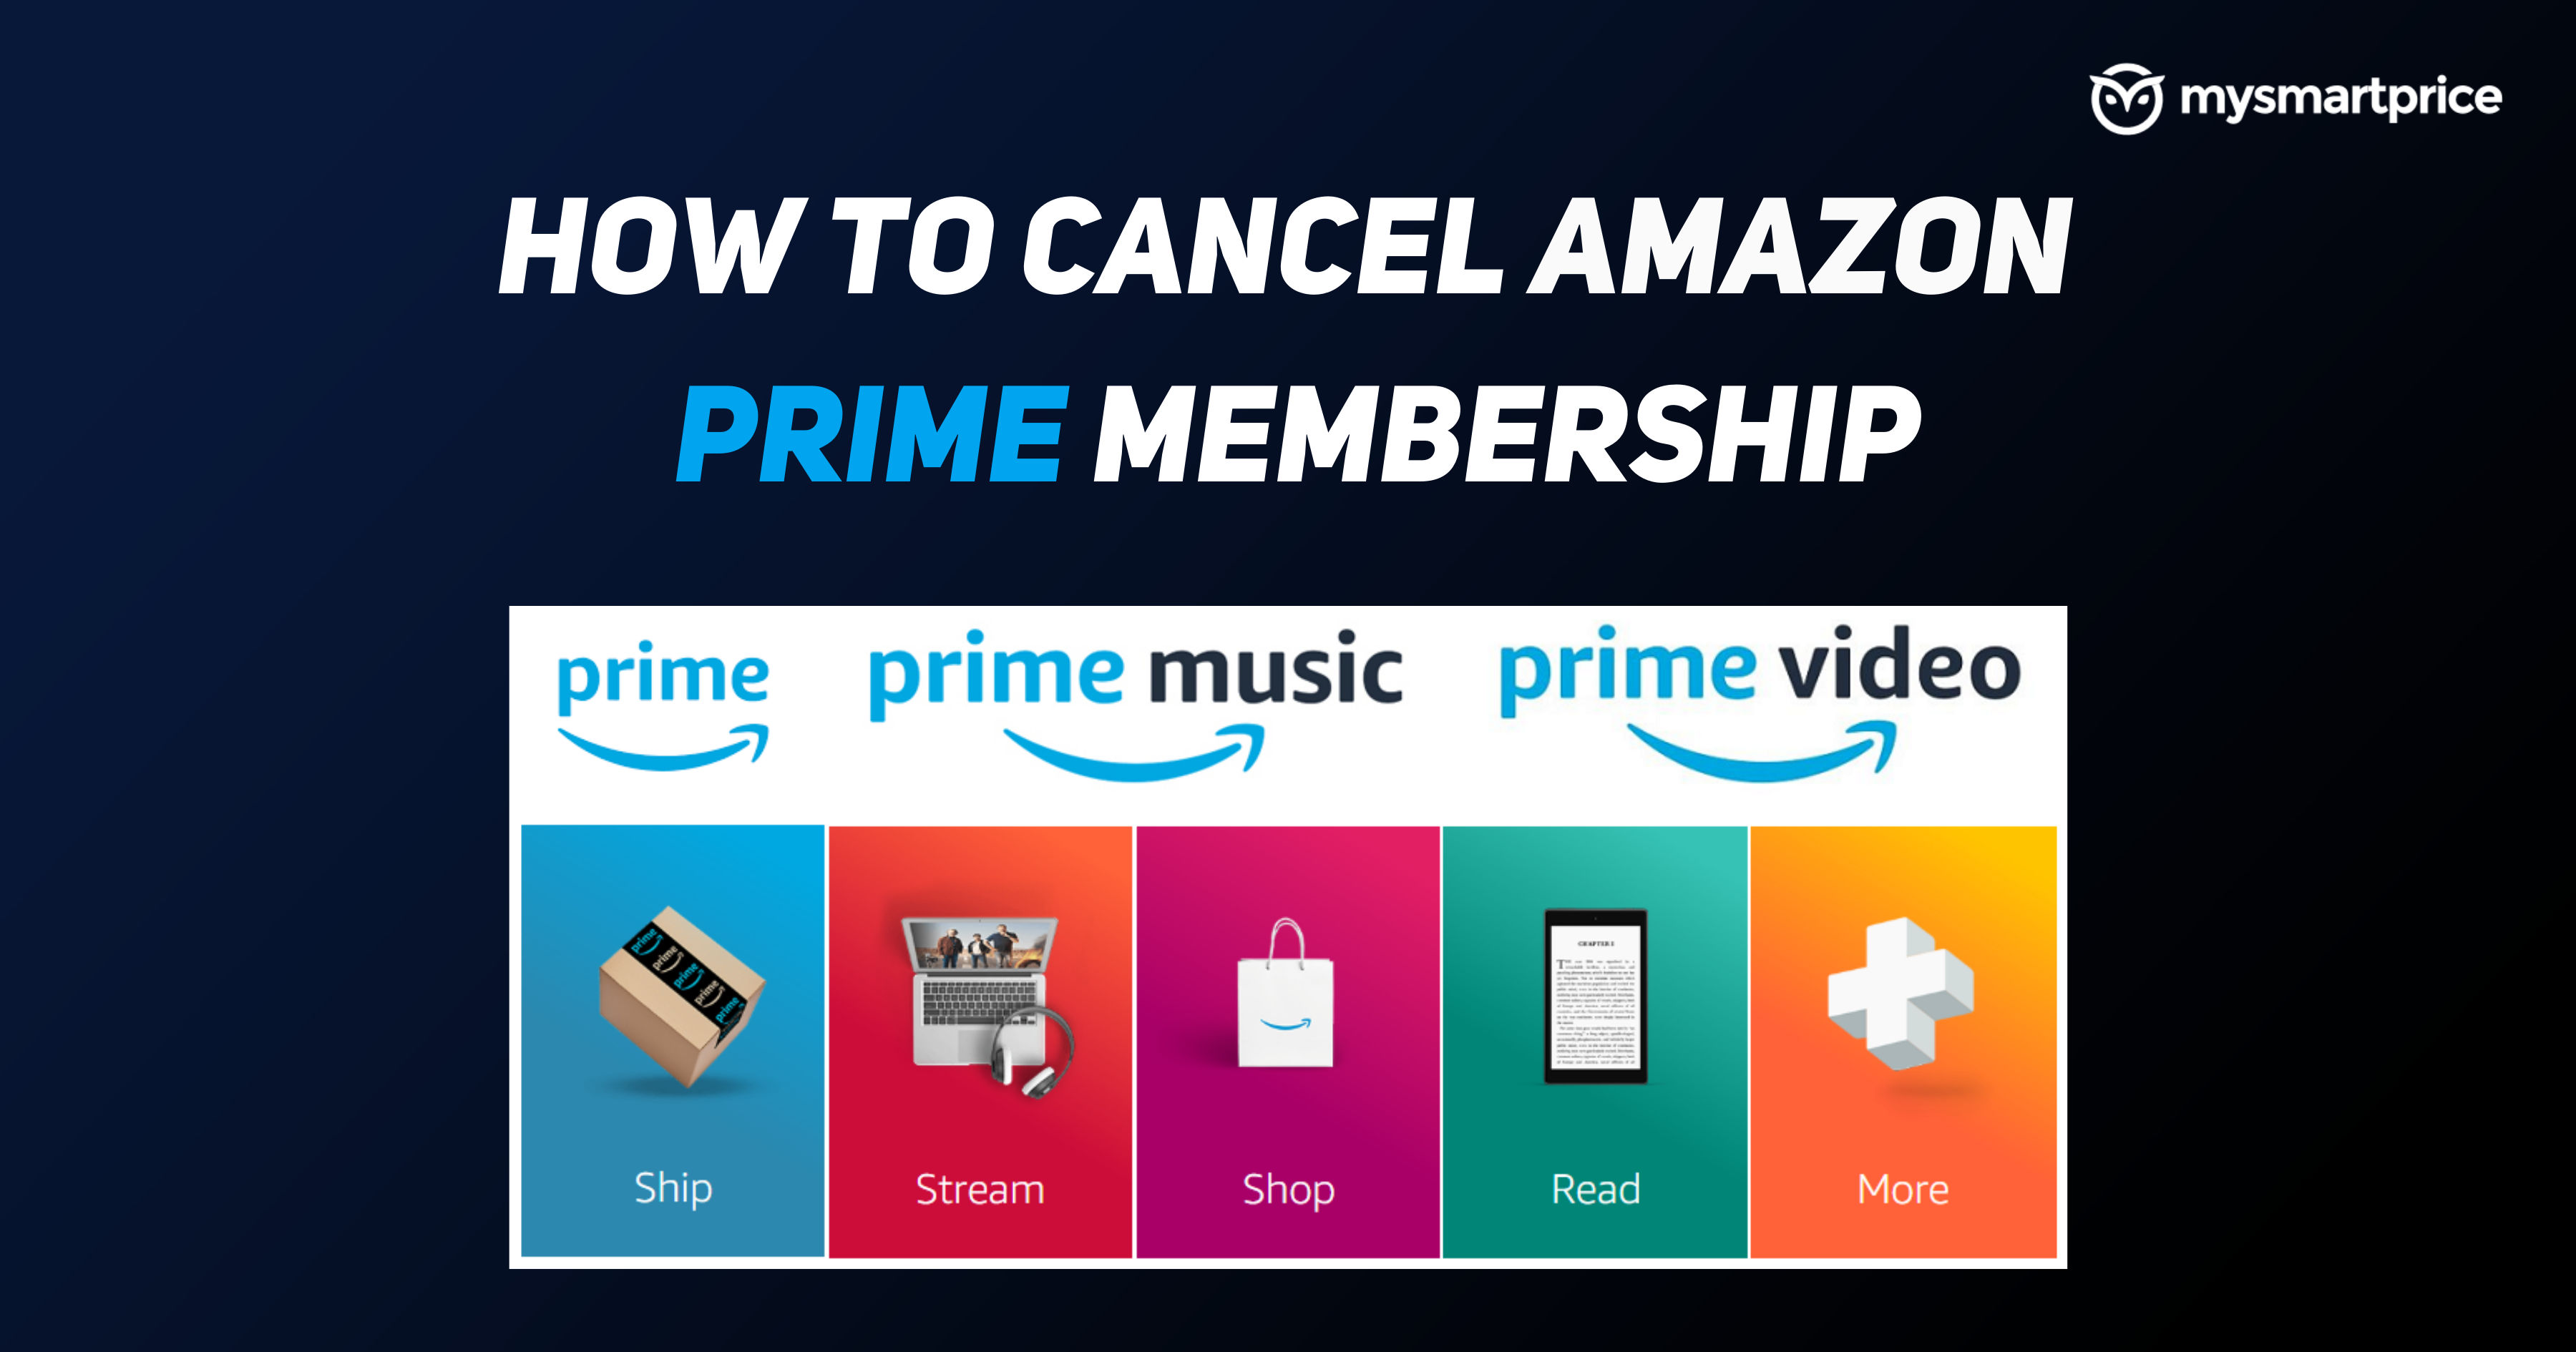 Amazon Prime Membership Offers 21 How To Get Prime Subscription Effectively Free Or With Up To 50 Discount Mysmartprice